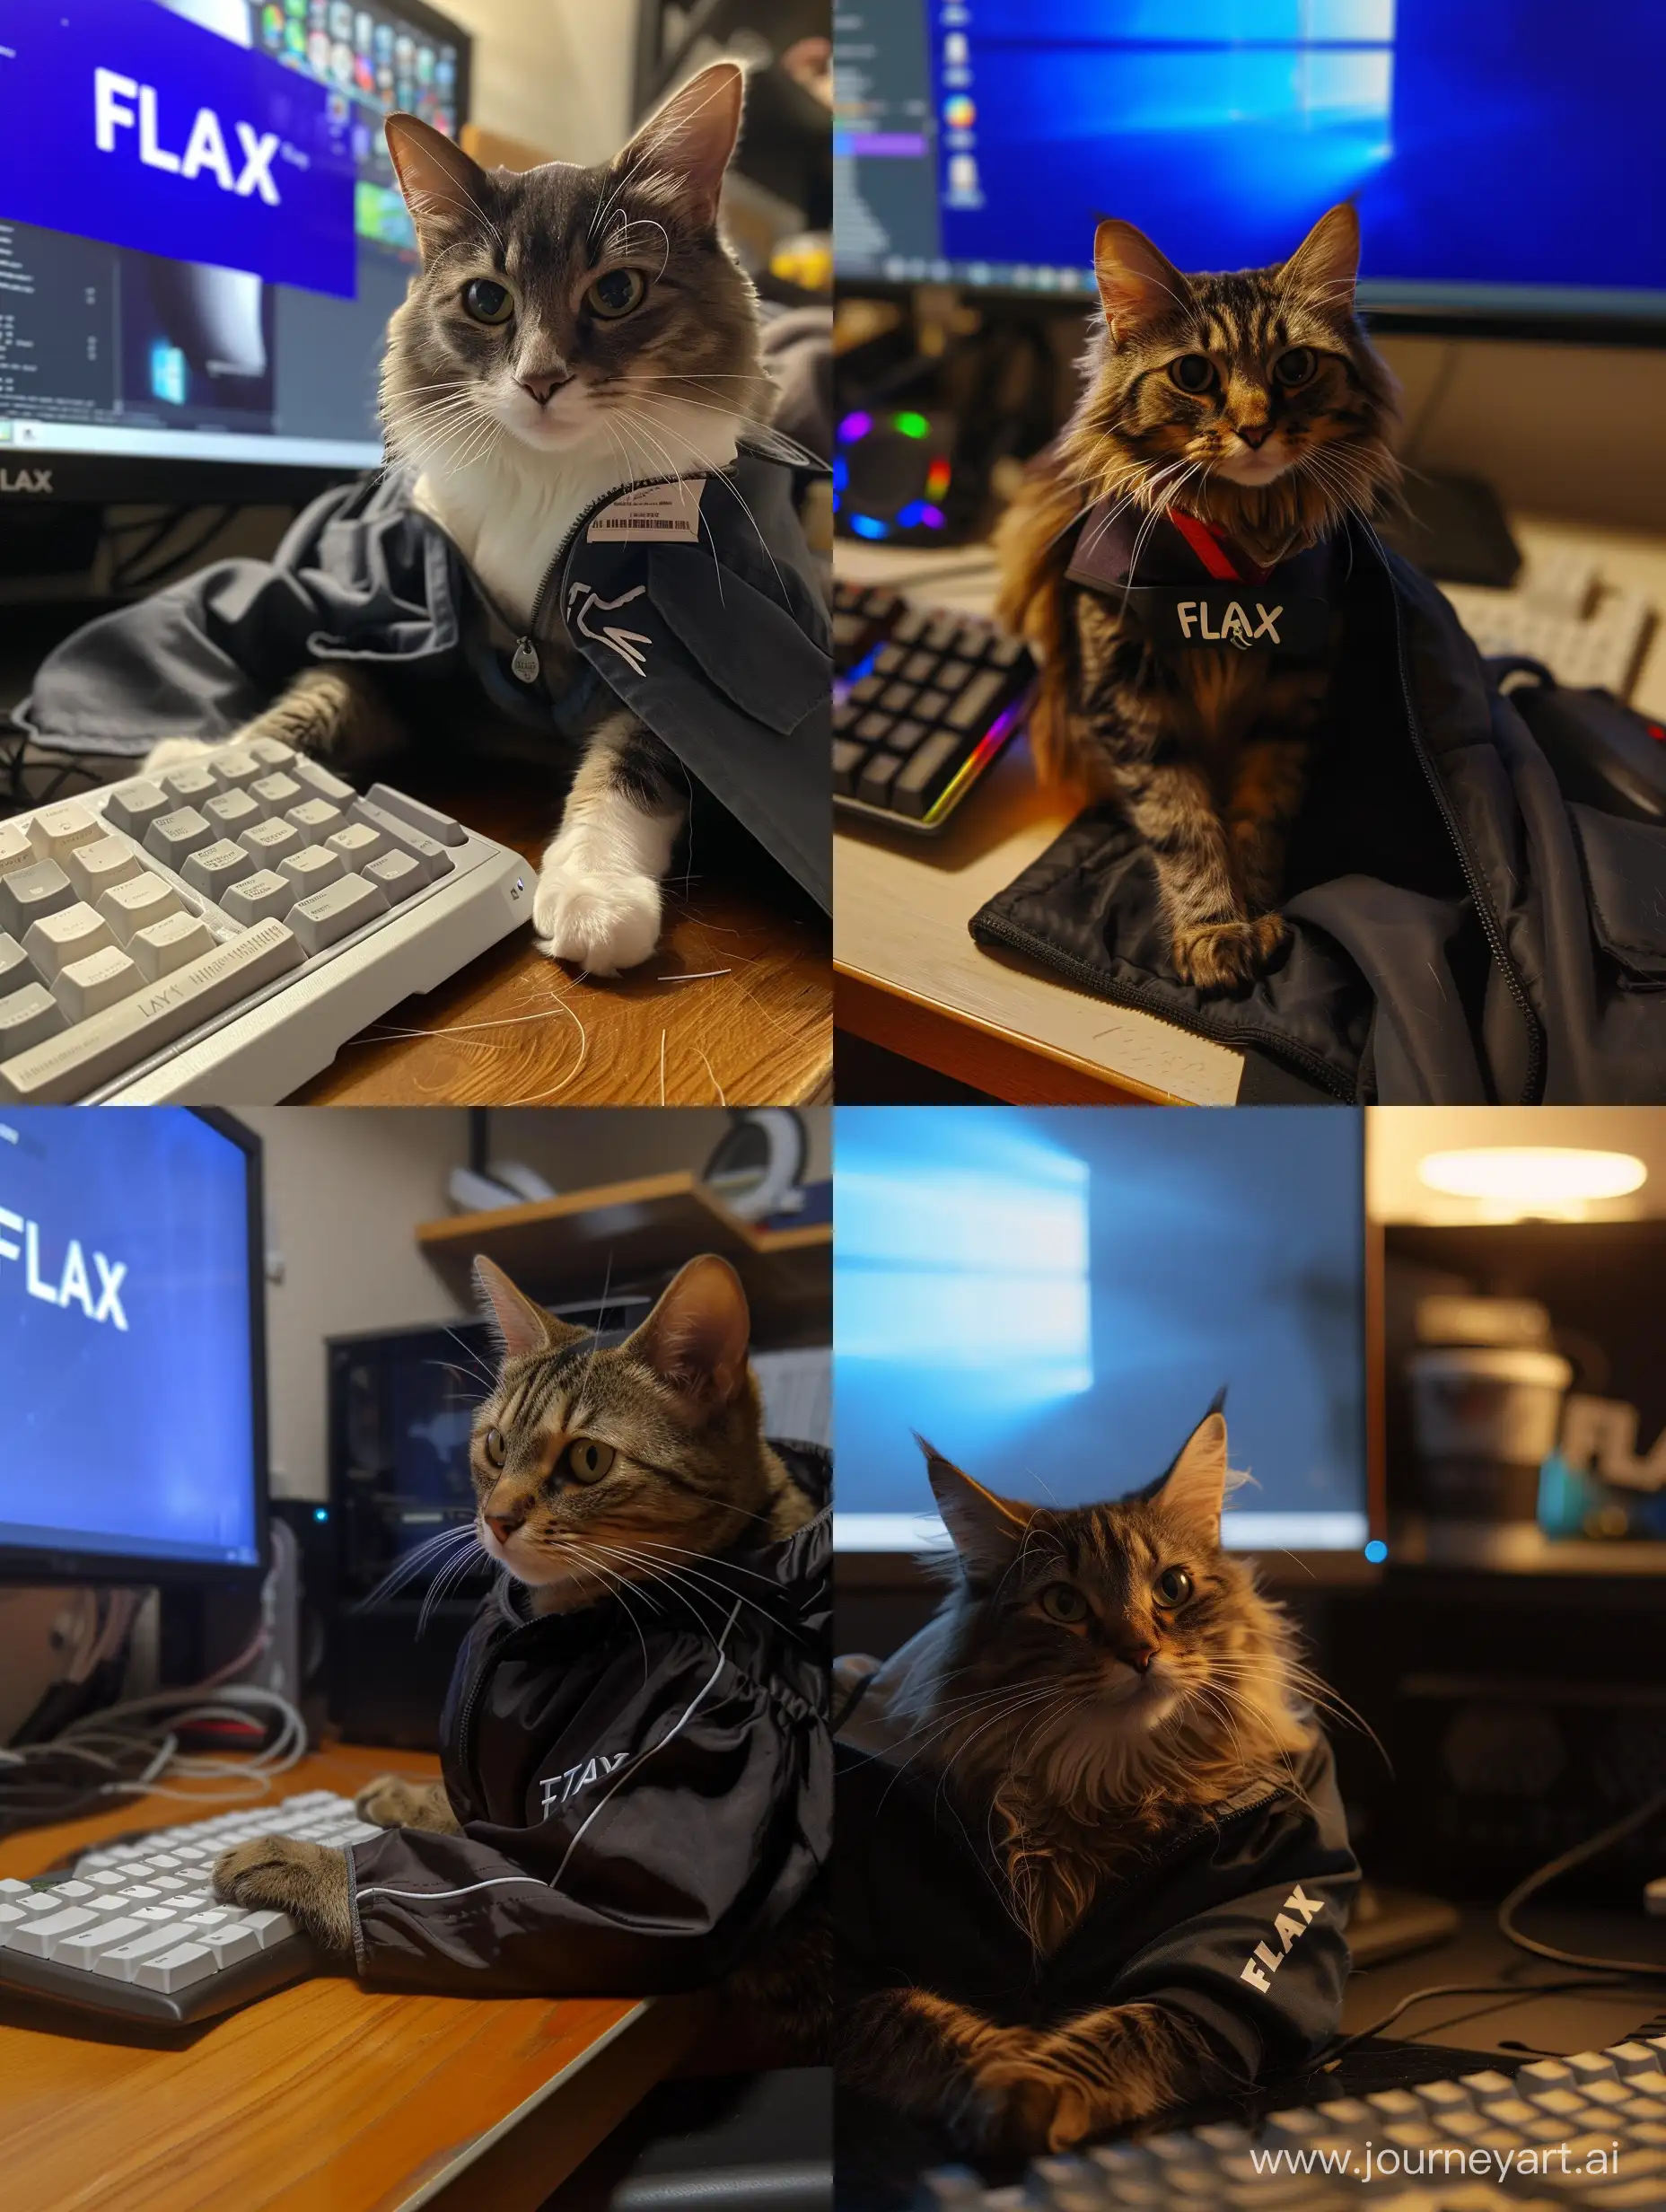 the cat is sitting at the computer and has the inscription “FLAX” written on his jacket